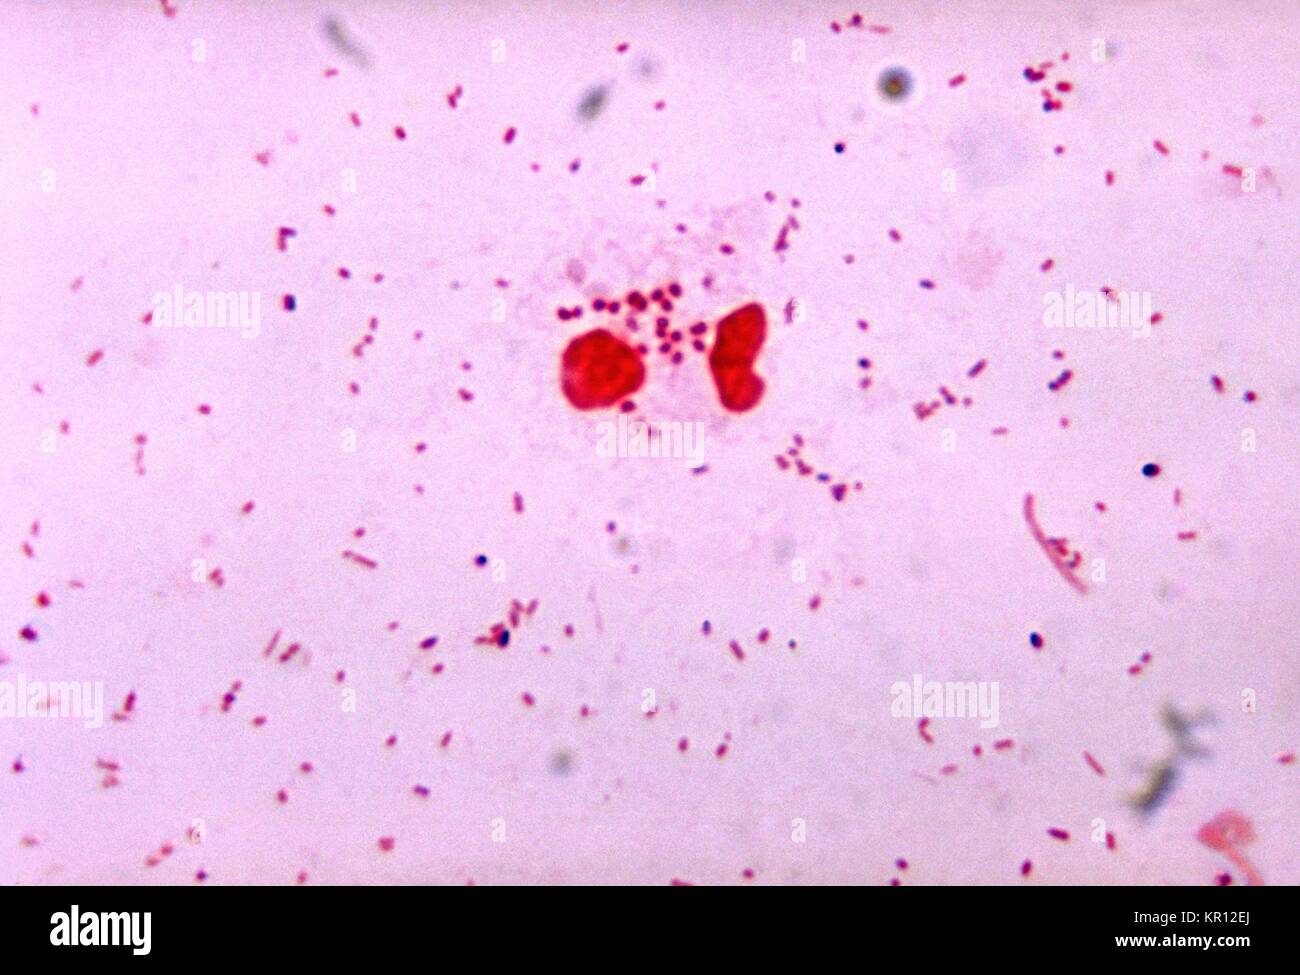 This is a photomicrograph of Neisseria gonorrhoeae the presence of mixed bacterial flora, 1972. Note the necrotic neutrophil. In 2000, 358, 995 cases of gonorrhea were reported to the CDC. In the United States, approximately 75 percent of all reported cases of gonorrhea are found in younger persons aged 15 to 29 years of age. Image courtesy CDC/Dr. James Volk. Stock Photo